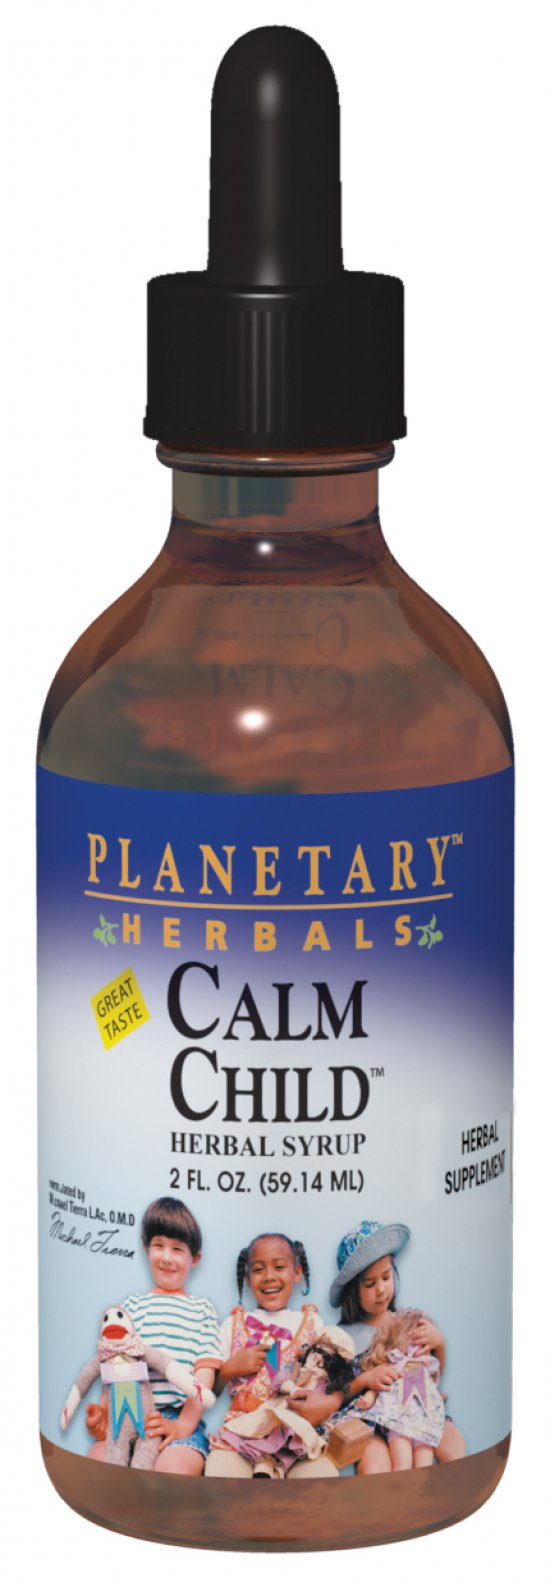 PLANETARY HERBALS: Calm Child Herbal Syrup 8 fl oz